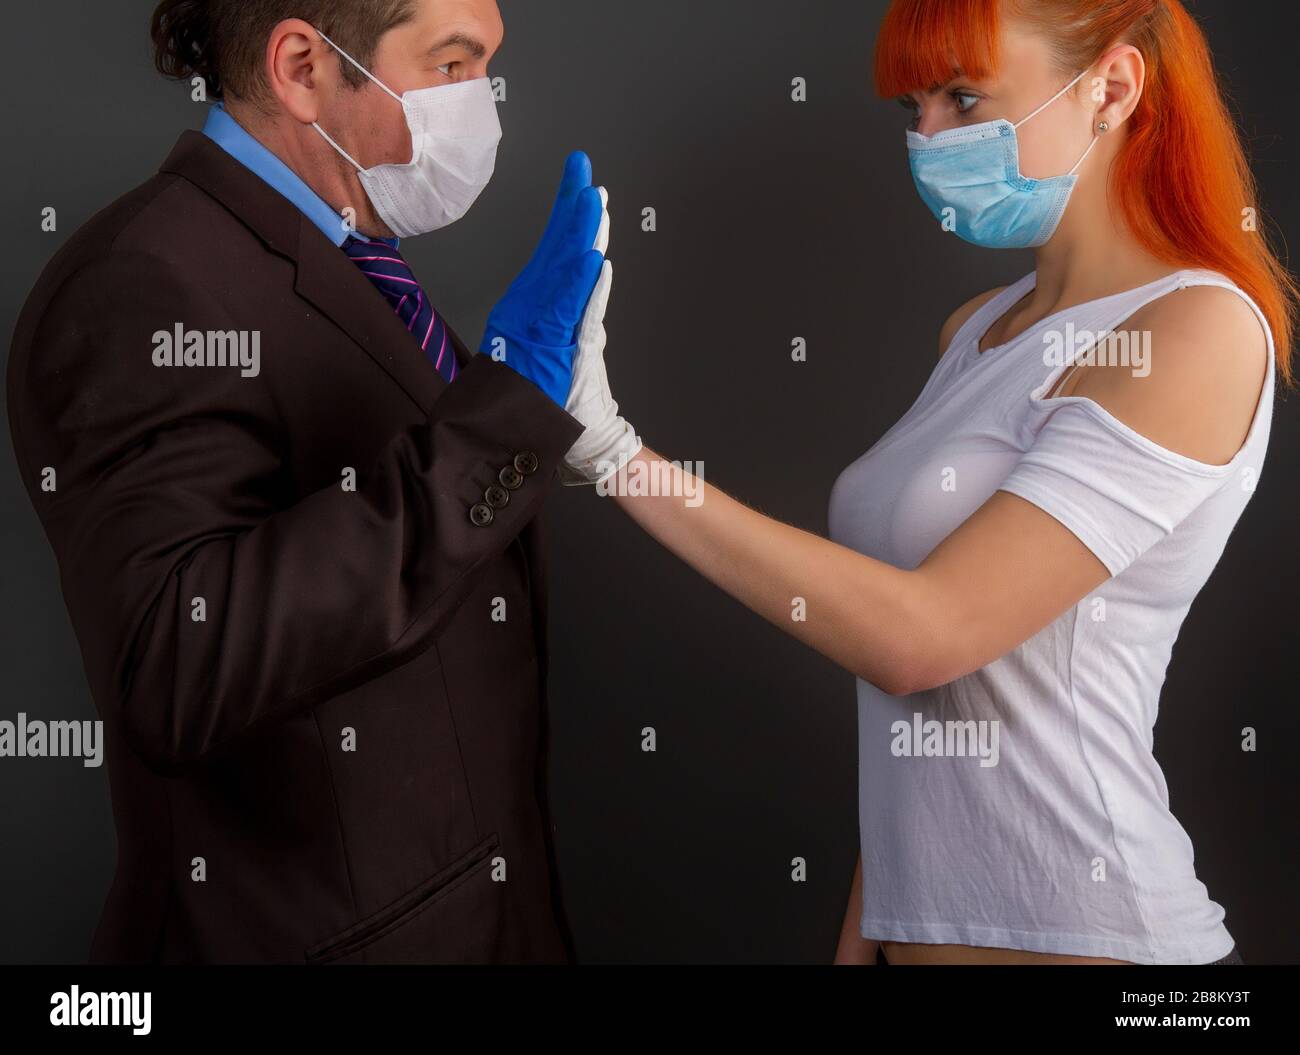 masked man and girl Stock Photo